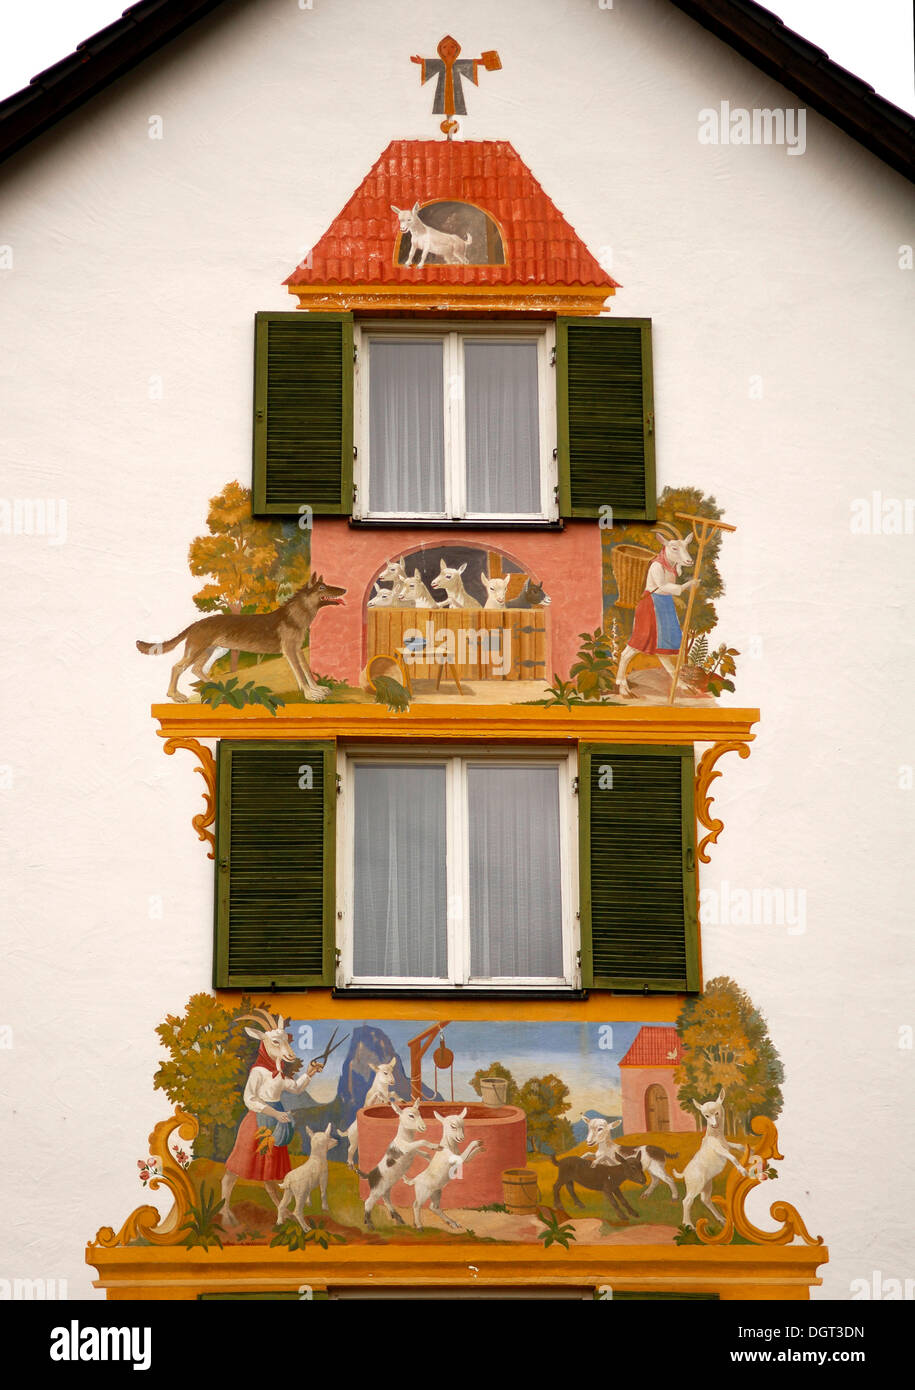 Lueftl Malerei with fairytale images, The Wolf and the Seven Young Kids, traditional mural painting on the side of a house Stock Photo